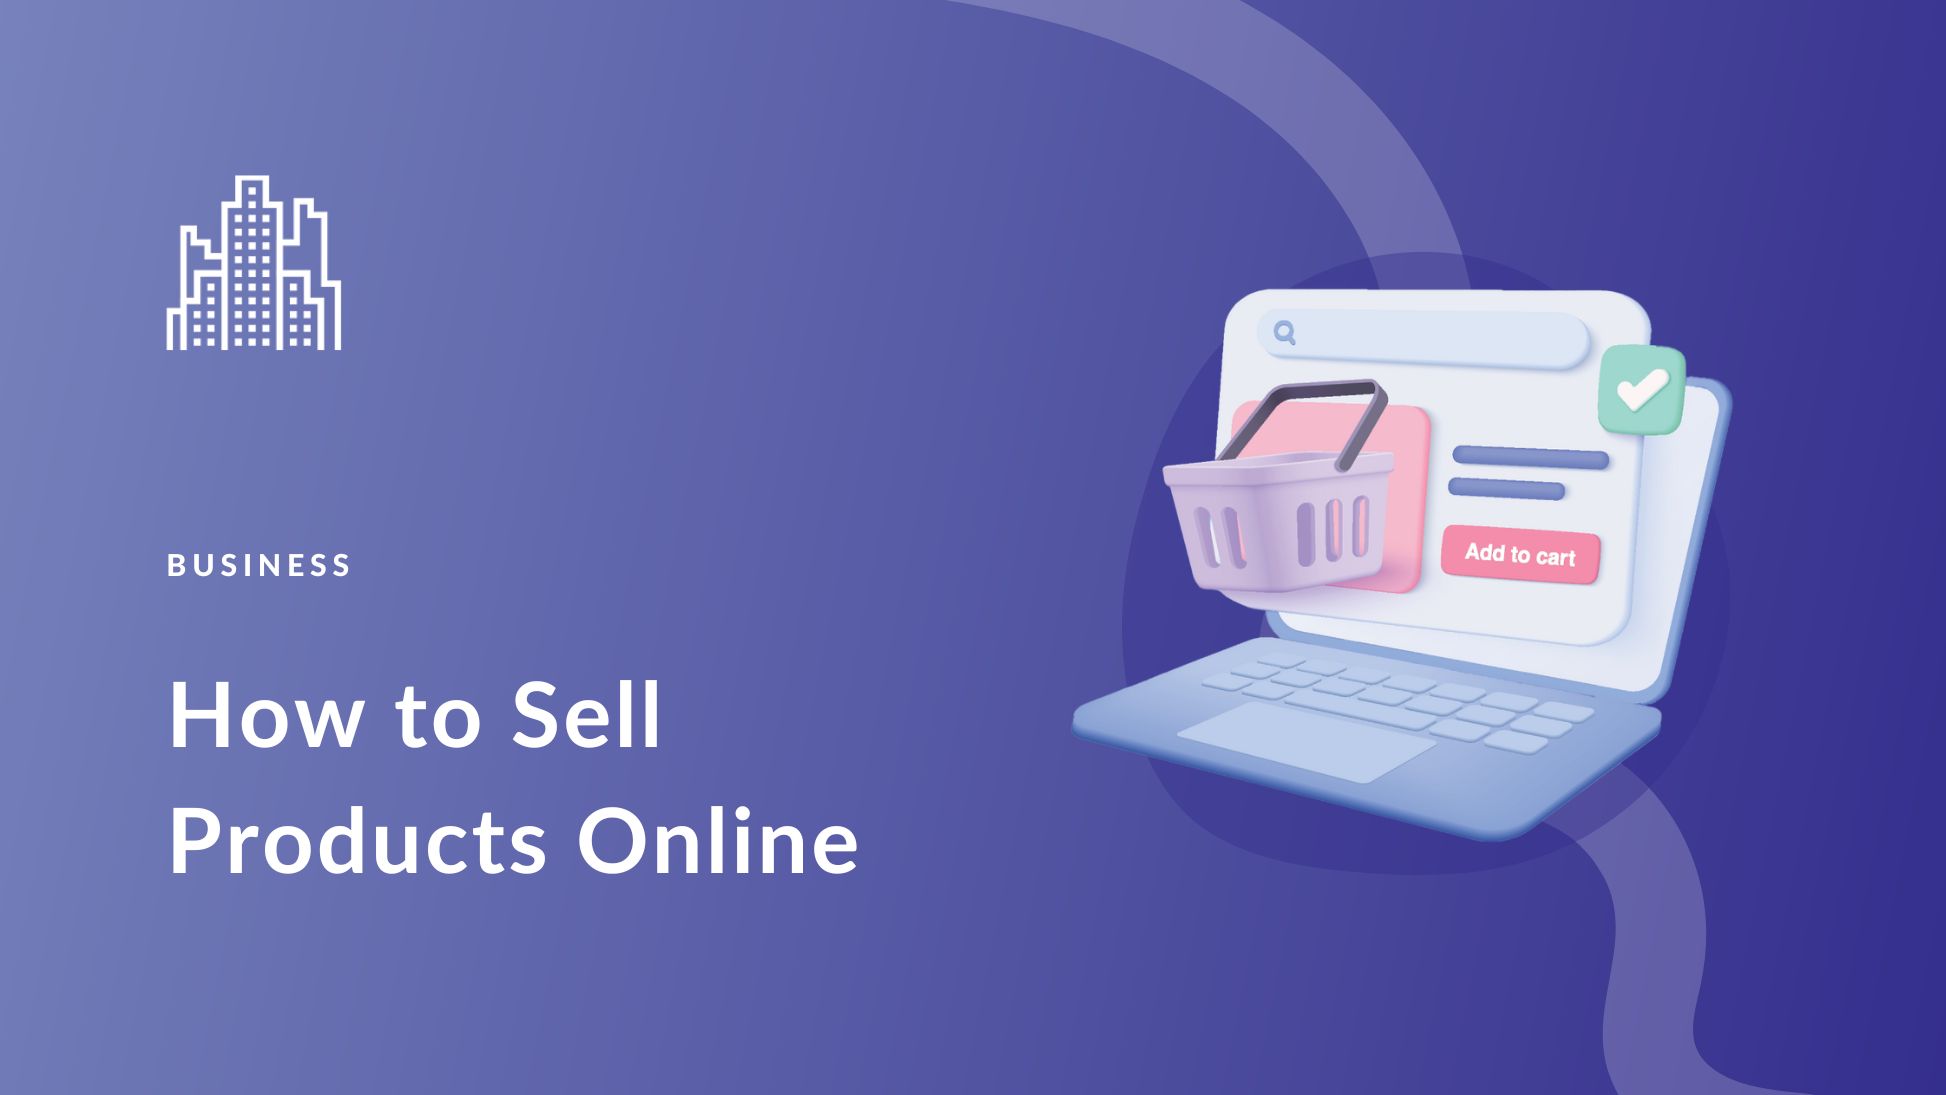 https://www.elegantthemes.com/blog/wp-content/uploads/2023/08/How-to-Sell-Products-Online-Guide.jpg